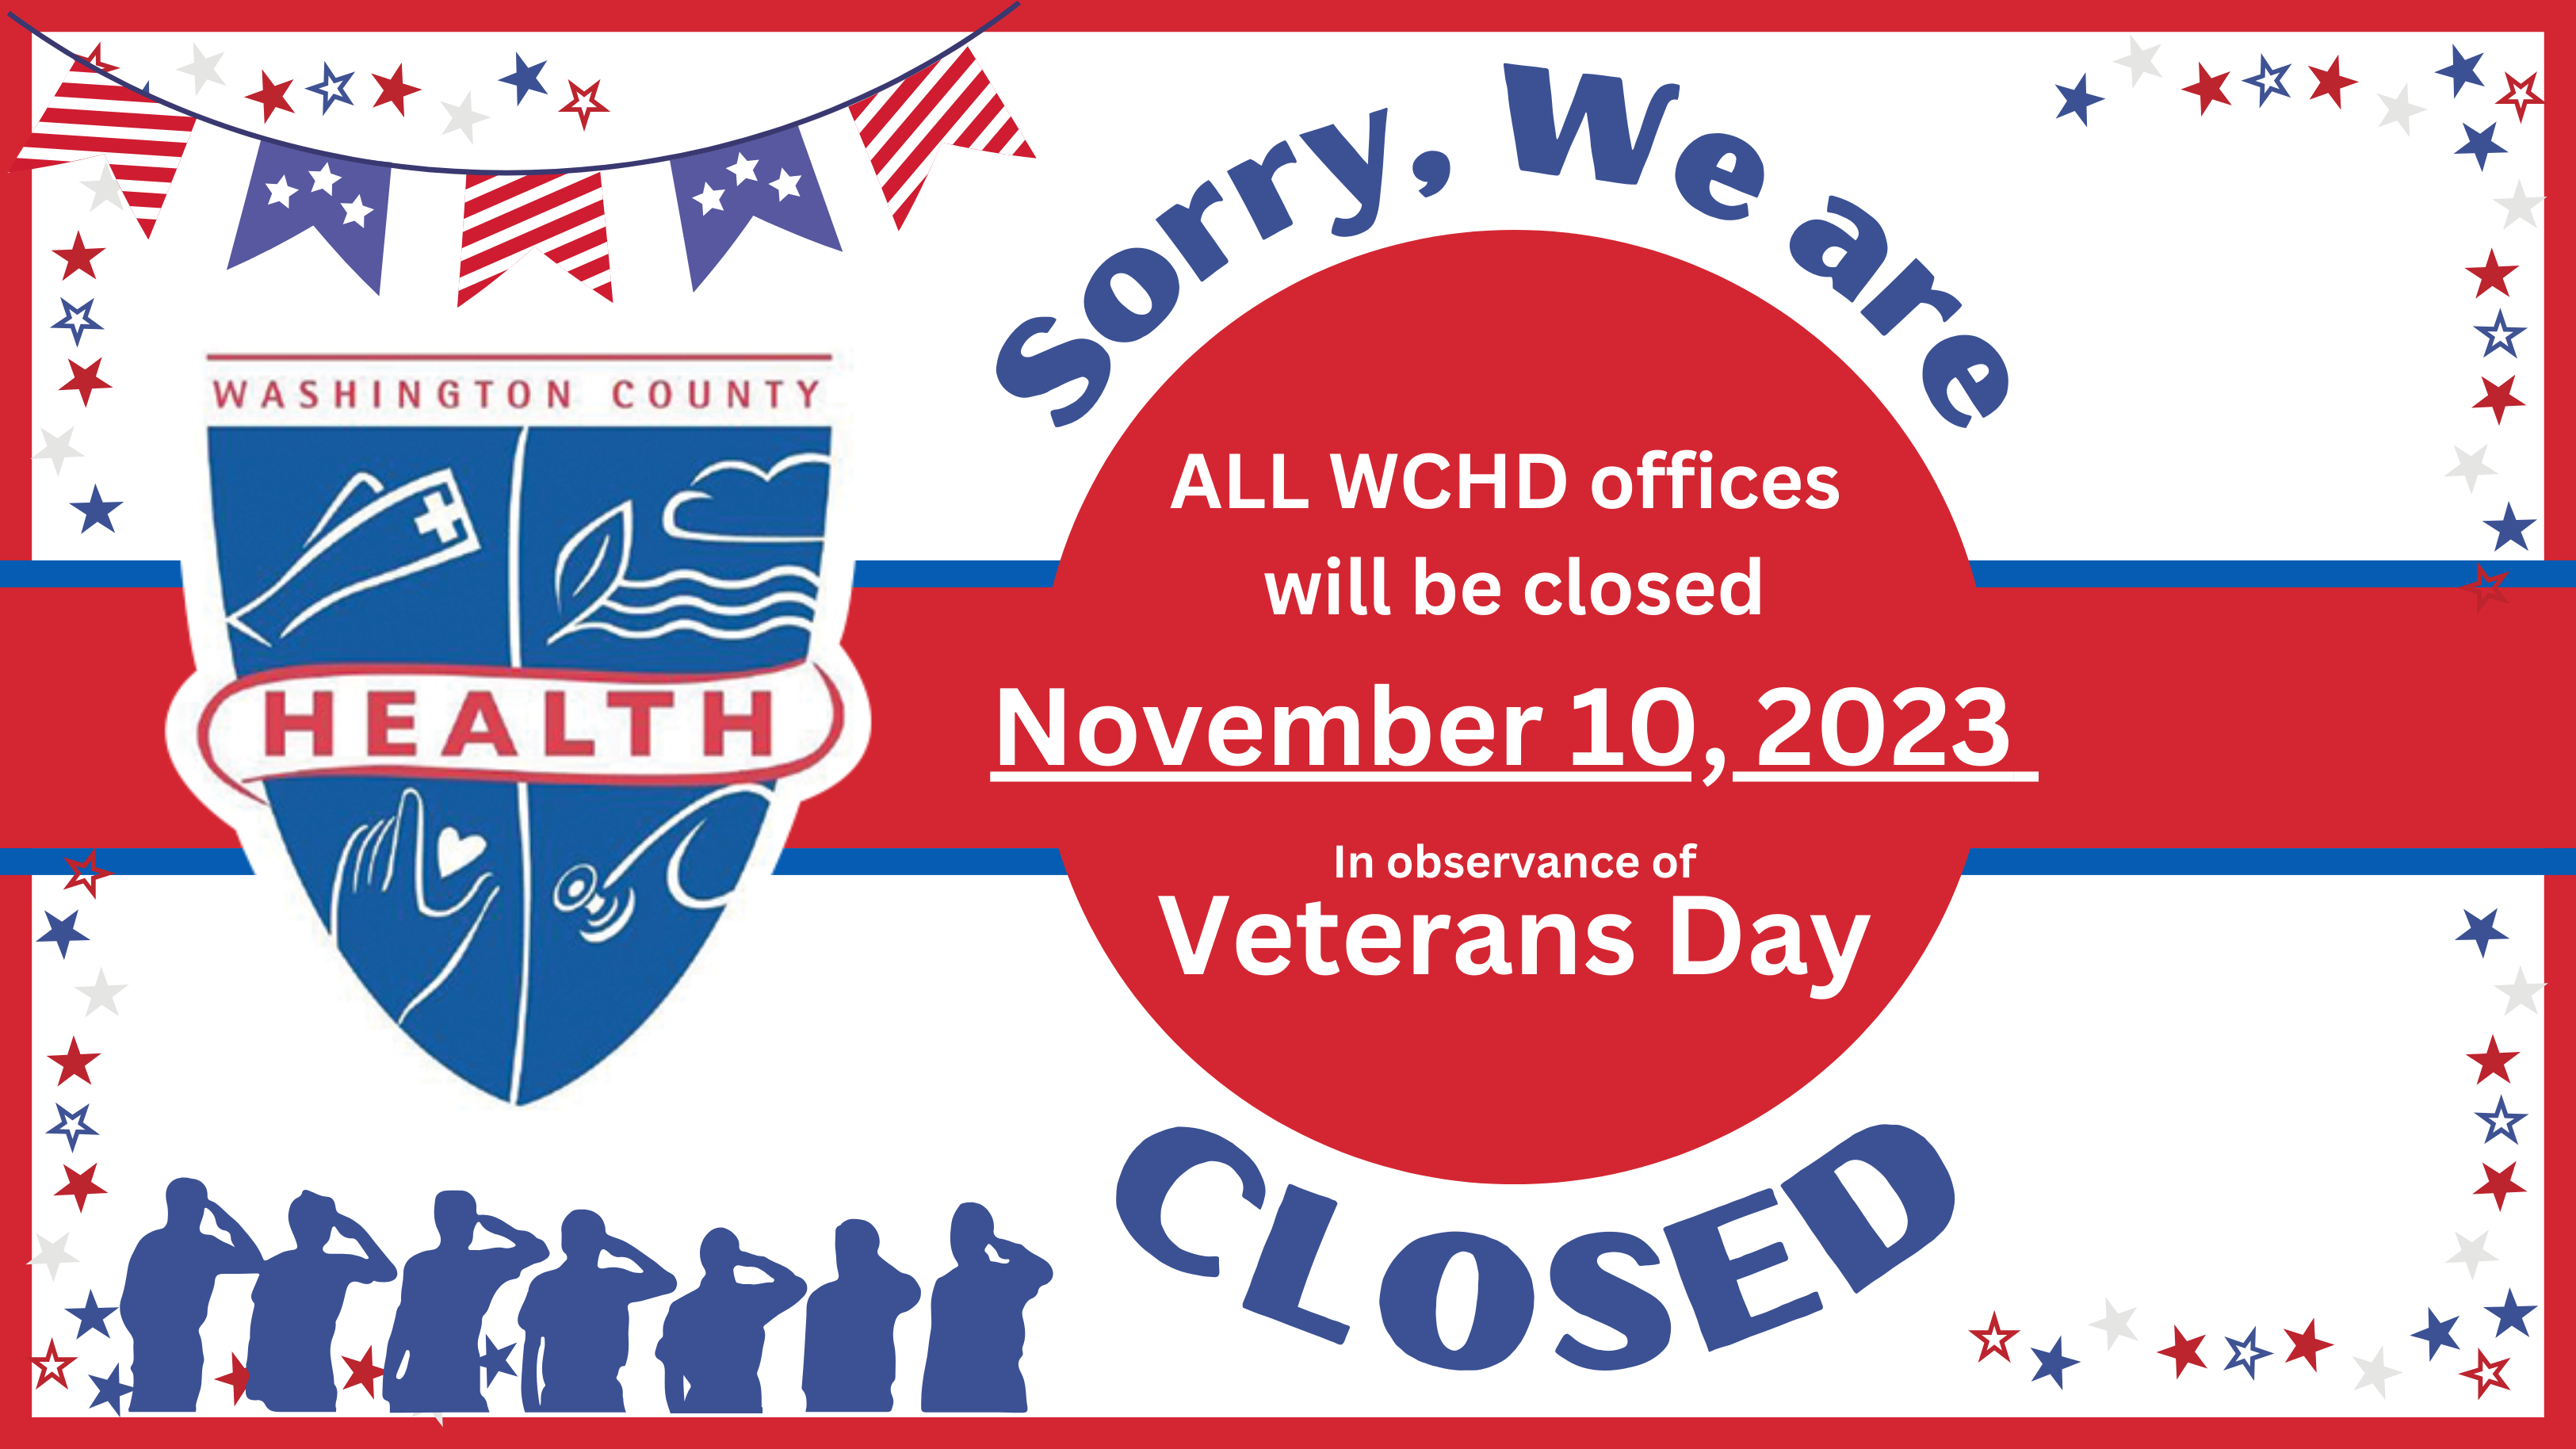 wchd logo. text: sorry we are closed november 10 in observance of veterans day